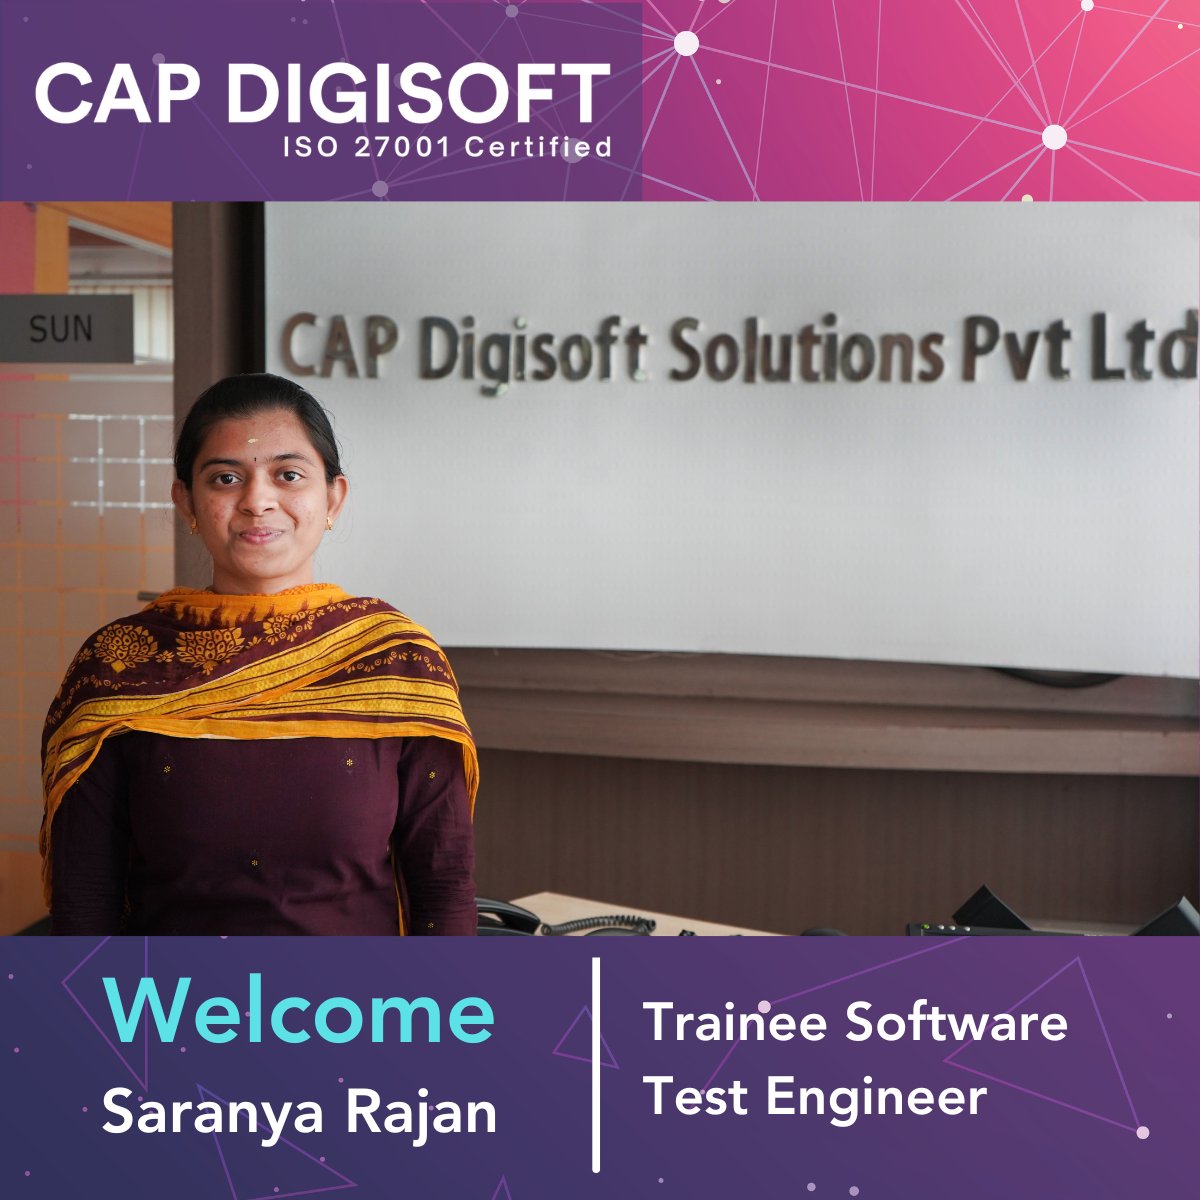 🎉 Welcome aboard, Saranya Rajan, our newest Trainee Software Test Engineer! 🚀 Joining our software family marks an exciting new chapter for both you and our company. We're absolutely thrilled to have you on board!

#SoftwareEngineering #OpportunitiesForGrowth #Collaboration